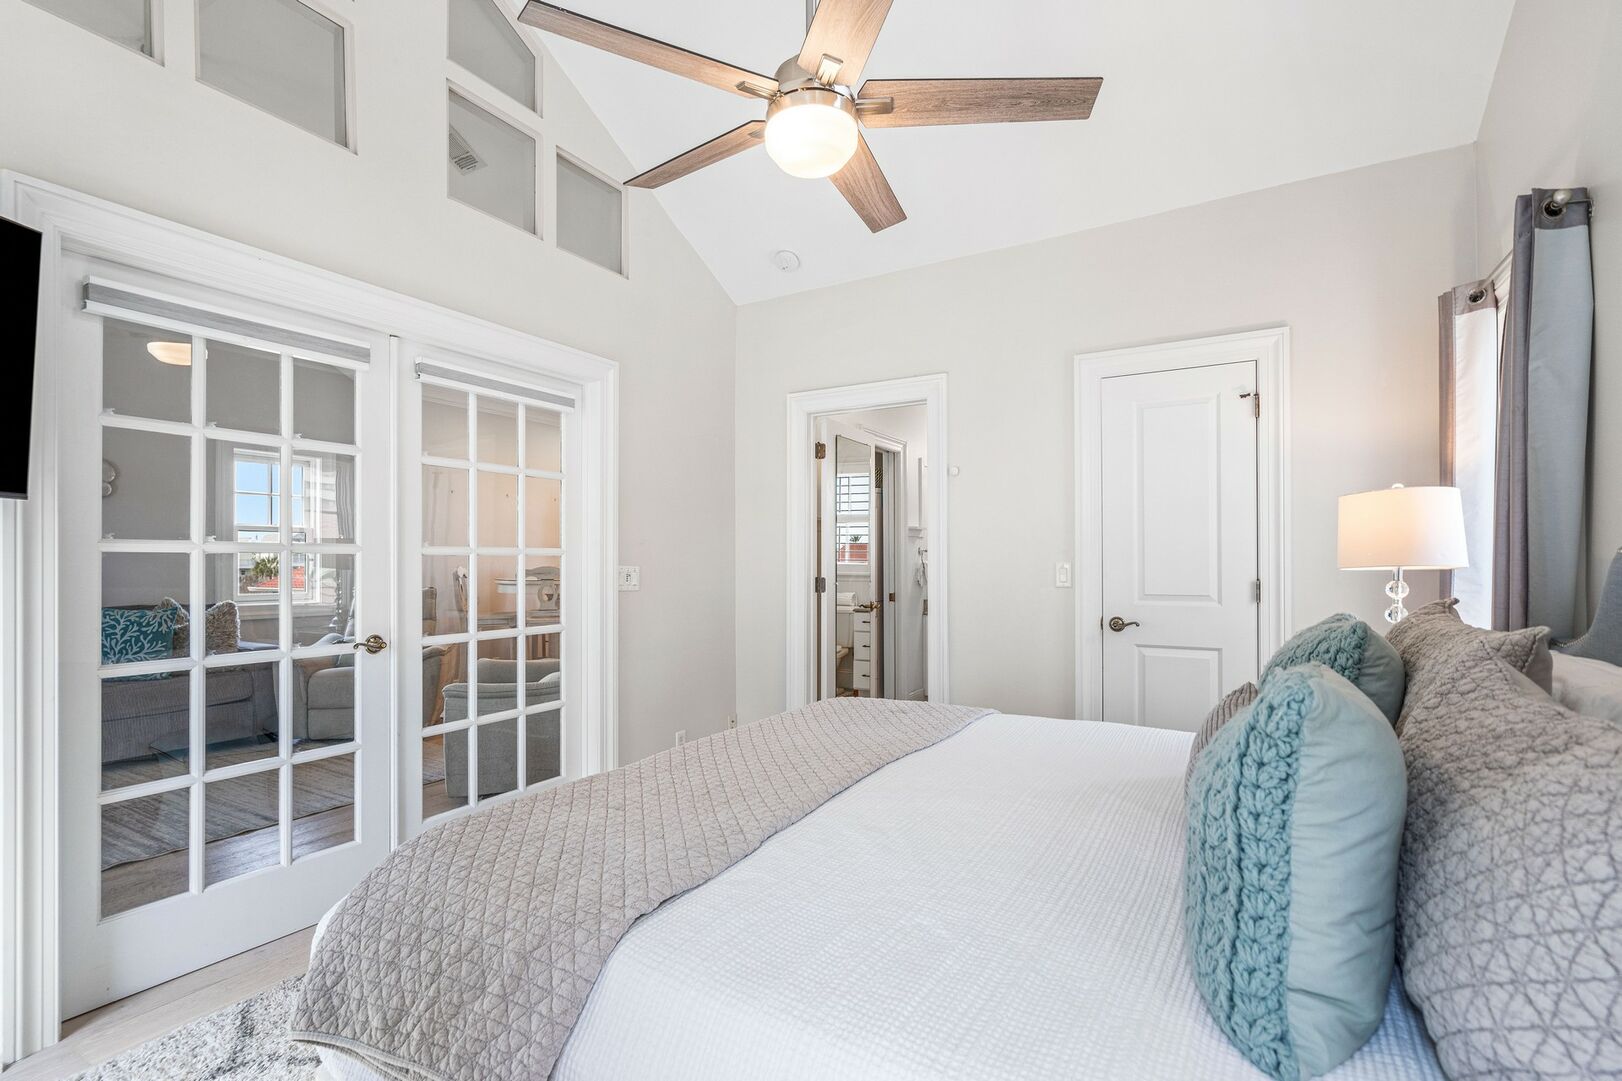 2nd-floor detached carriage house with kitchenette, laundry room, bathroom and king bedroom